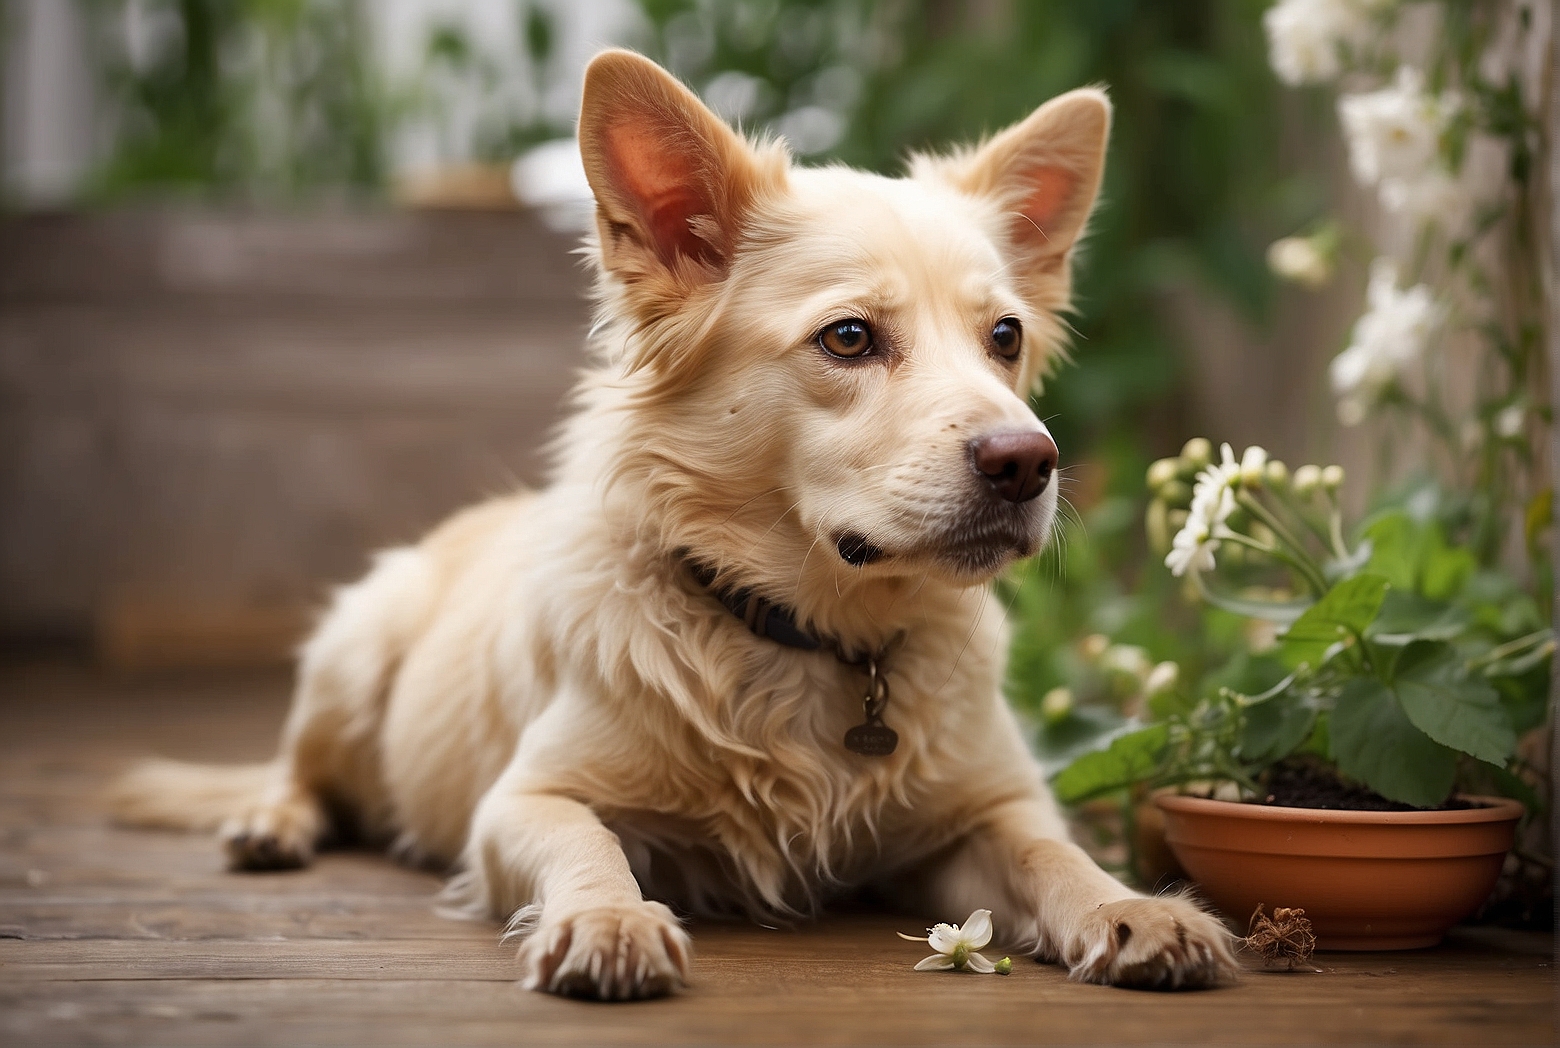 10 Natural Home Remedies to Get Rid of Fleas on Dogs